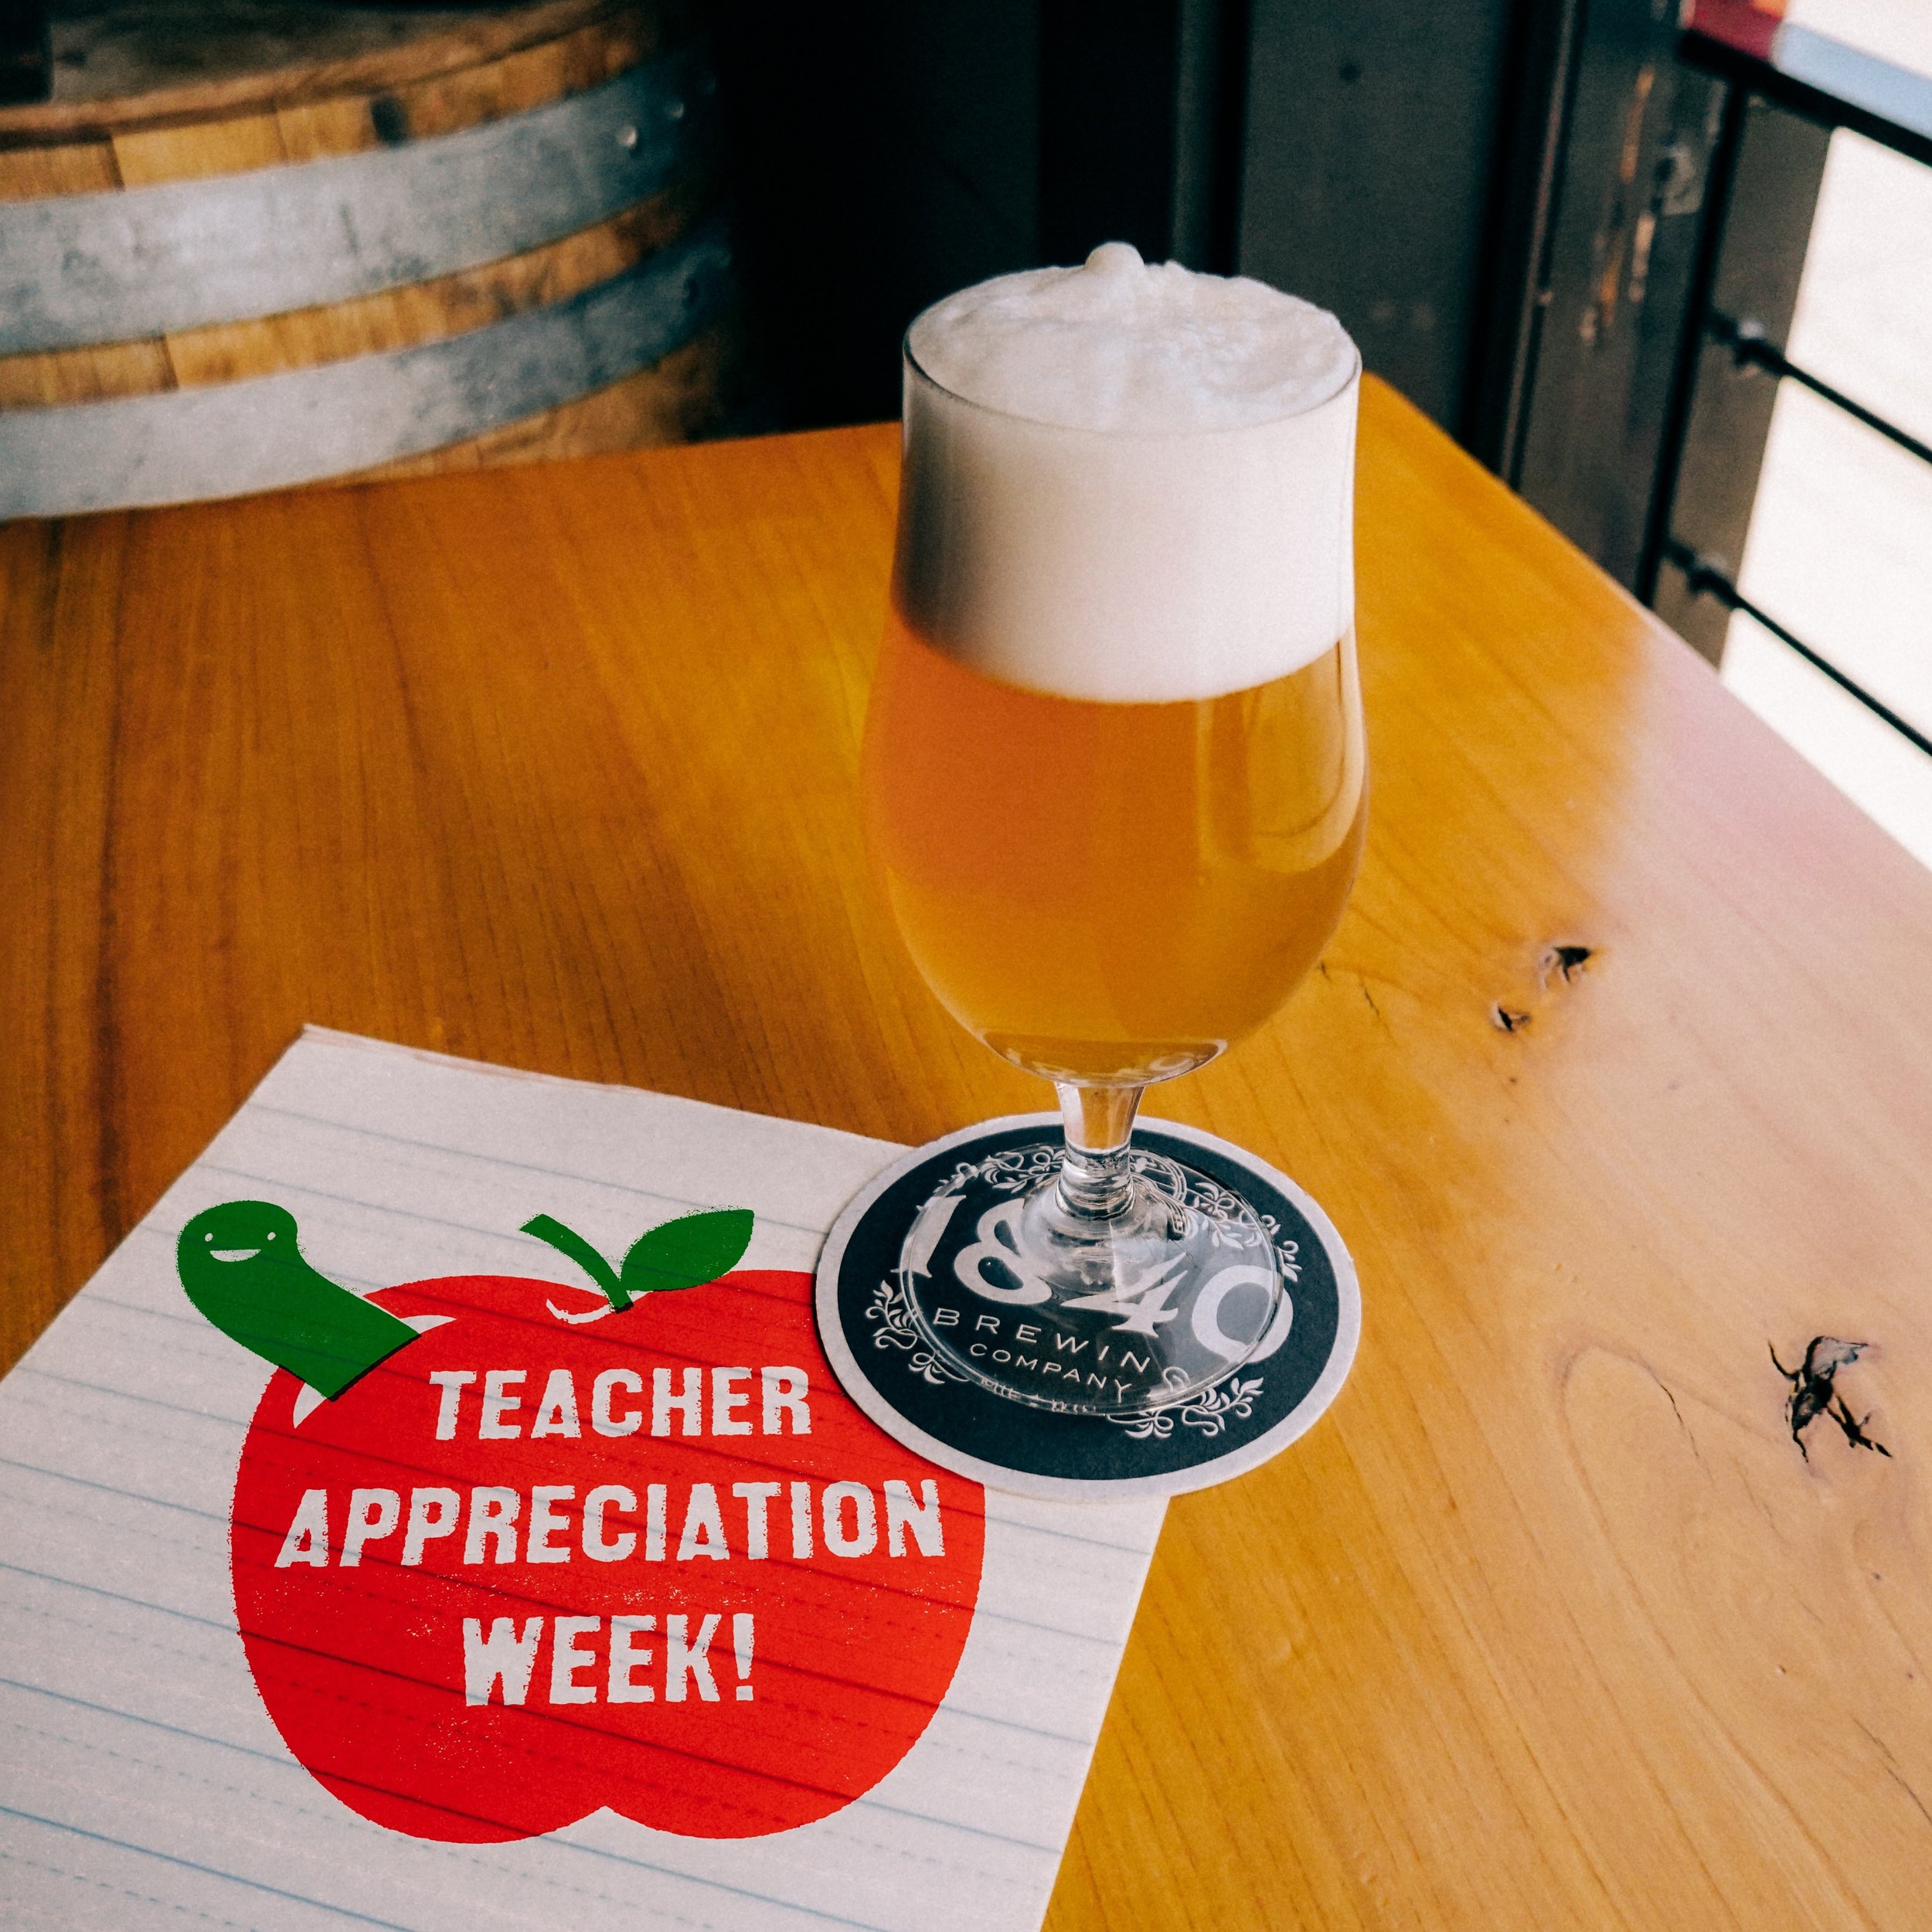 Here&rsquo;s to all the teachers out there! To show our appreciation, educators can come in any day this week (both locations, 5/7 through 5/12) and get a free pour of beer (up to $7 value).

Just bring proof of your education job (papers to grade, s